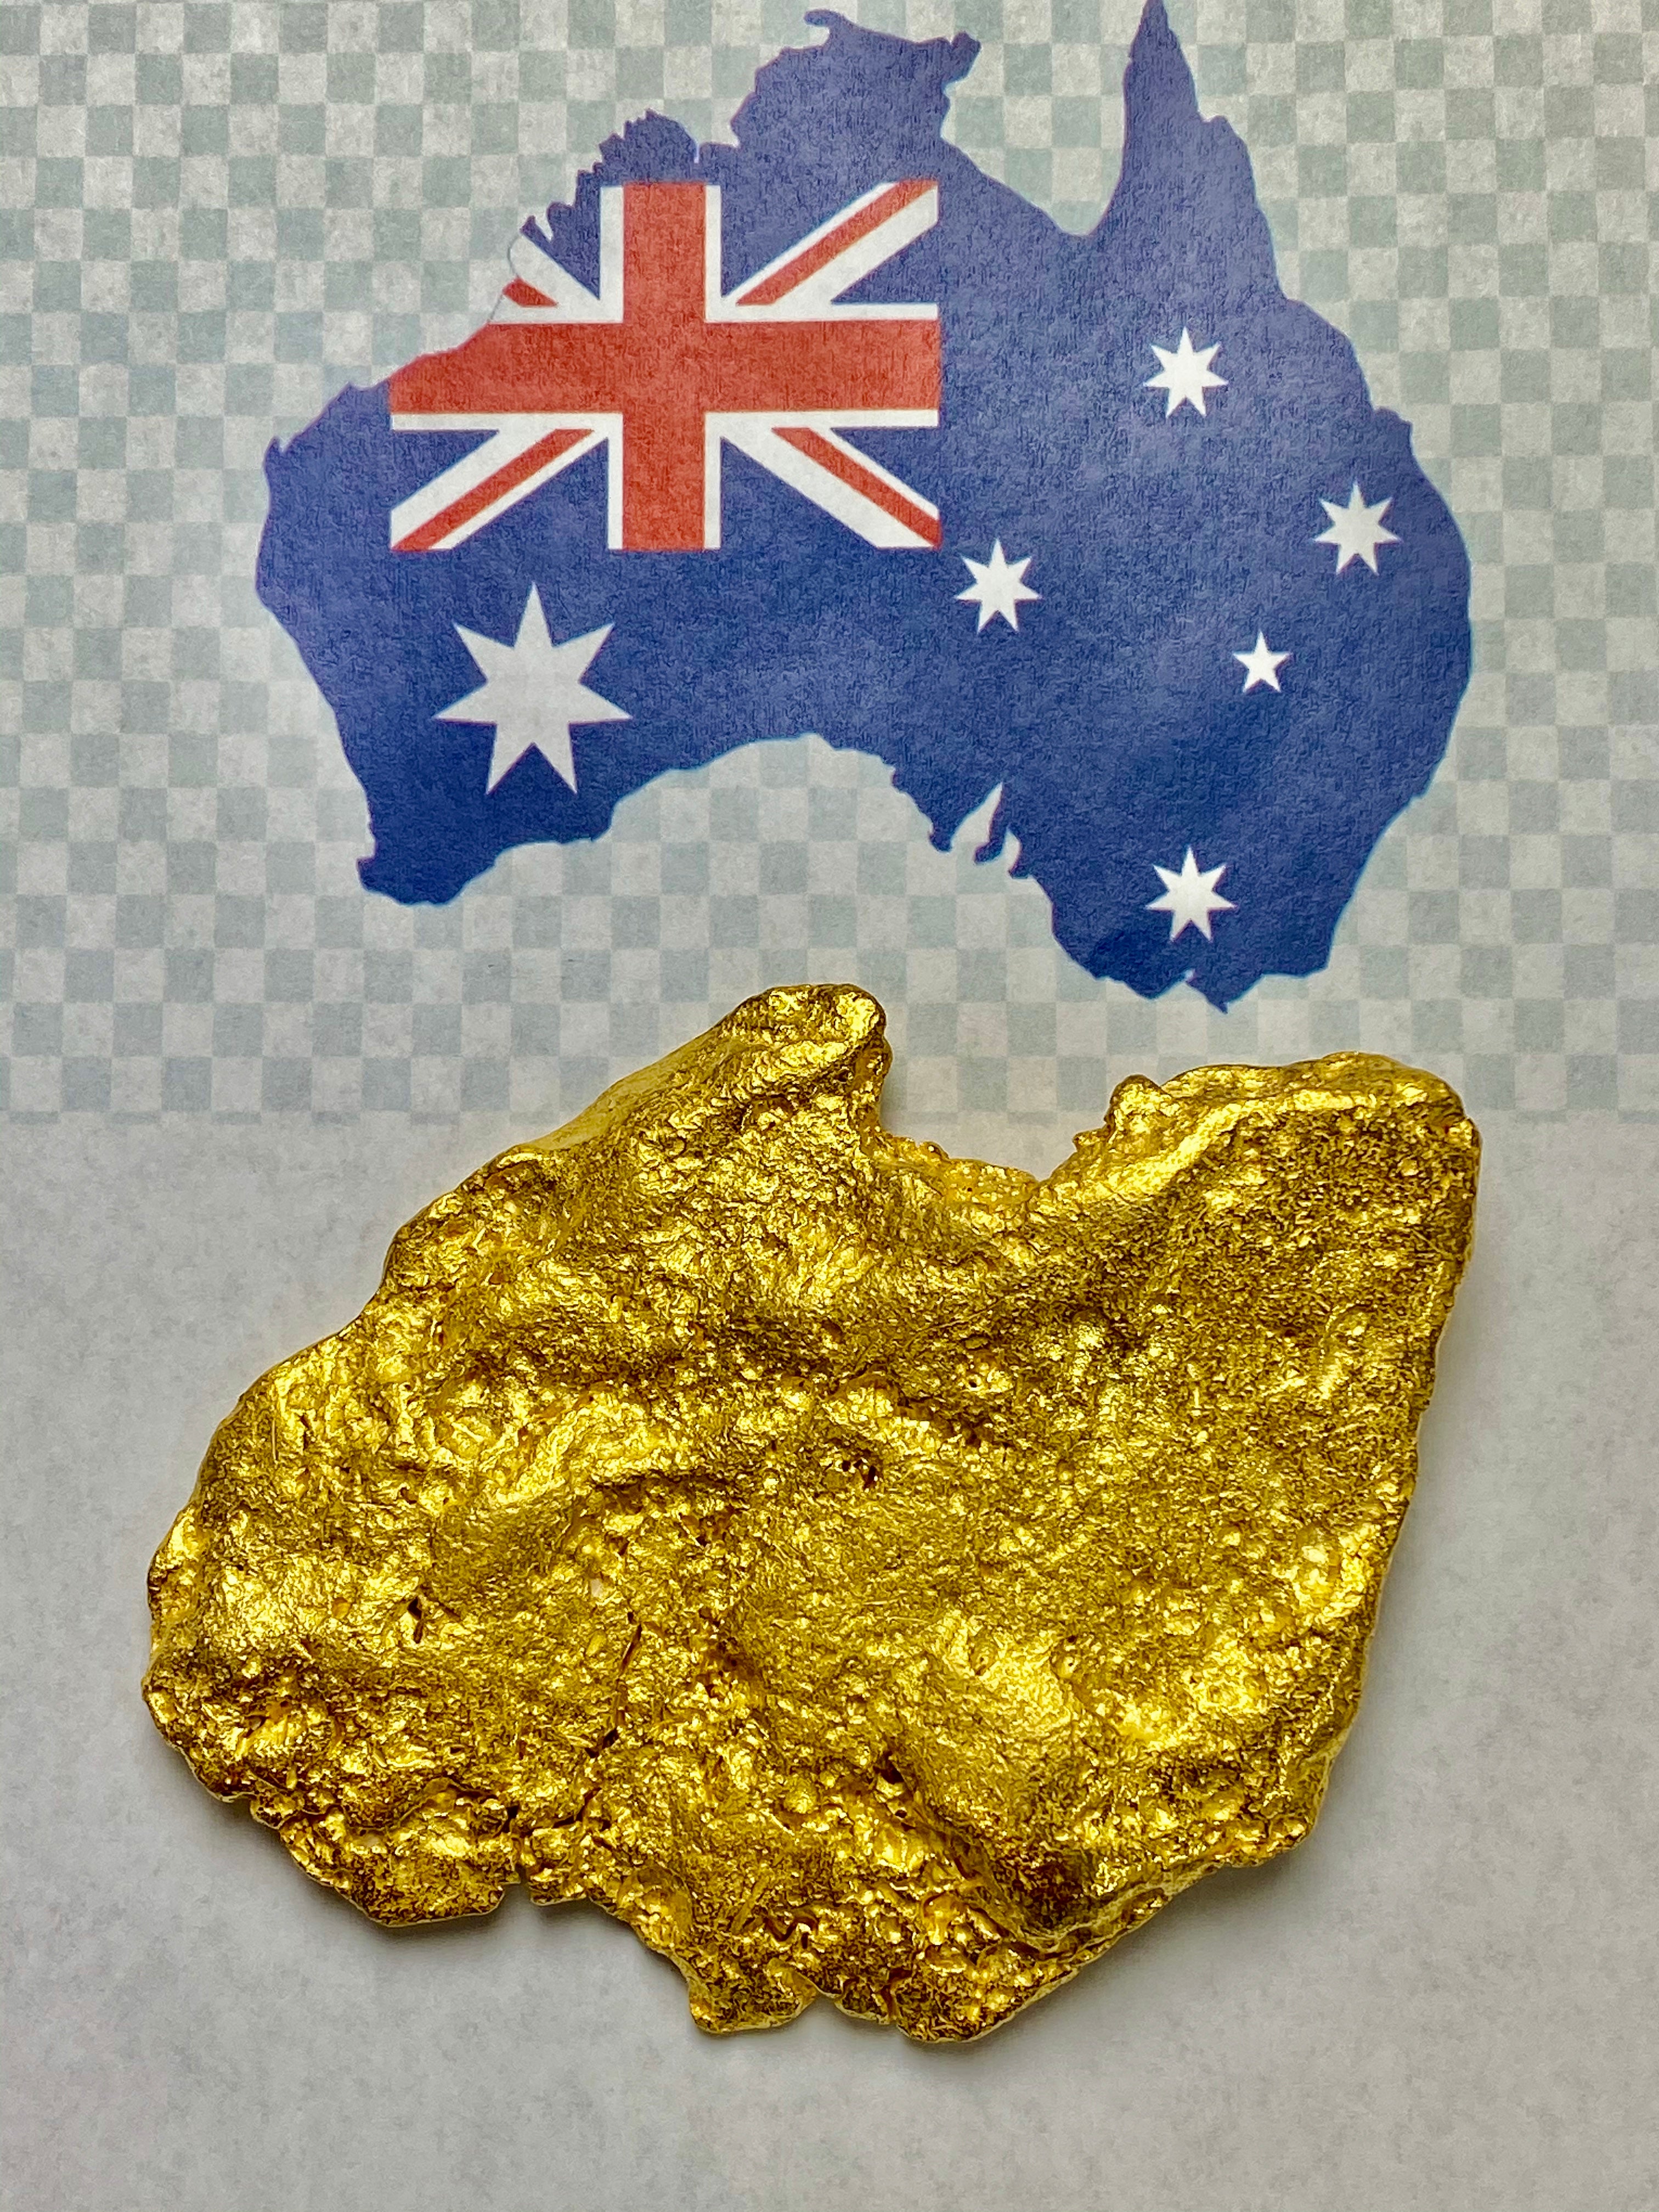 Large Natural Gold Nugget Australian "THE BIG AU” 709.9 Grams 22.82 Troy Ounces Very Rare